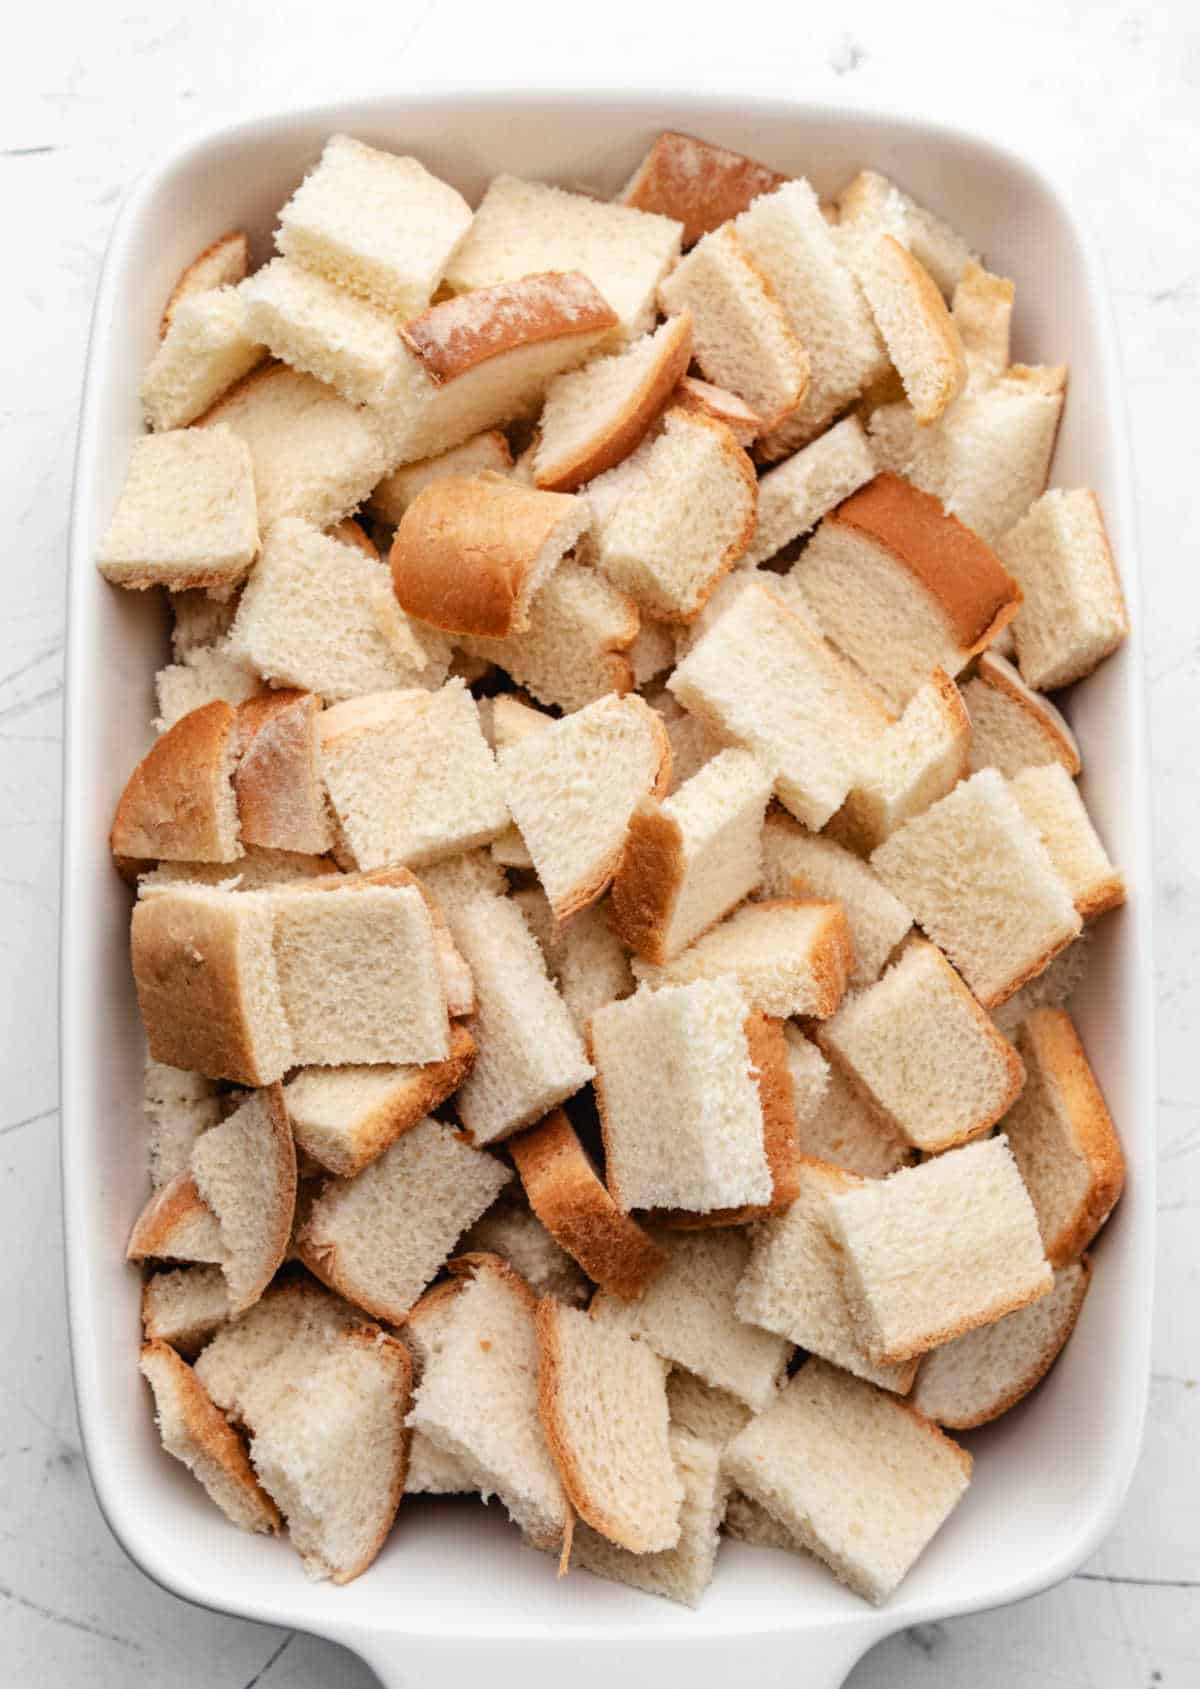 Cubed white bread in a white baking dish.